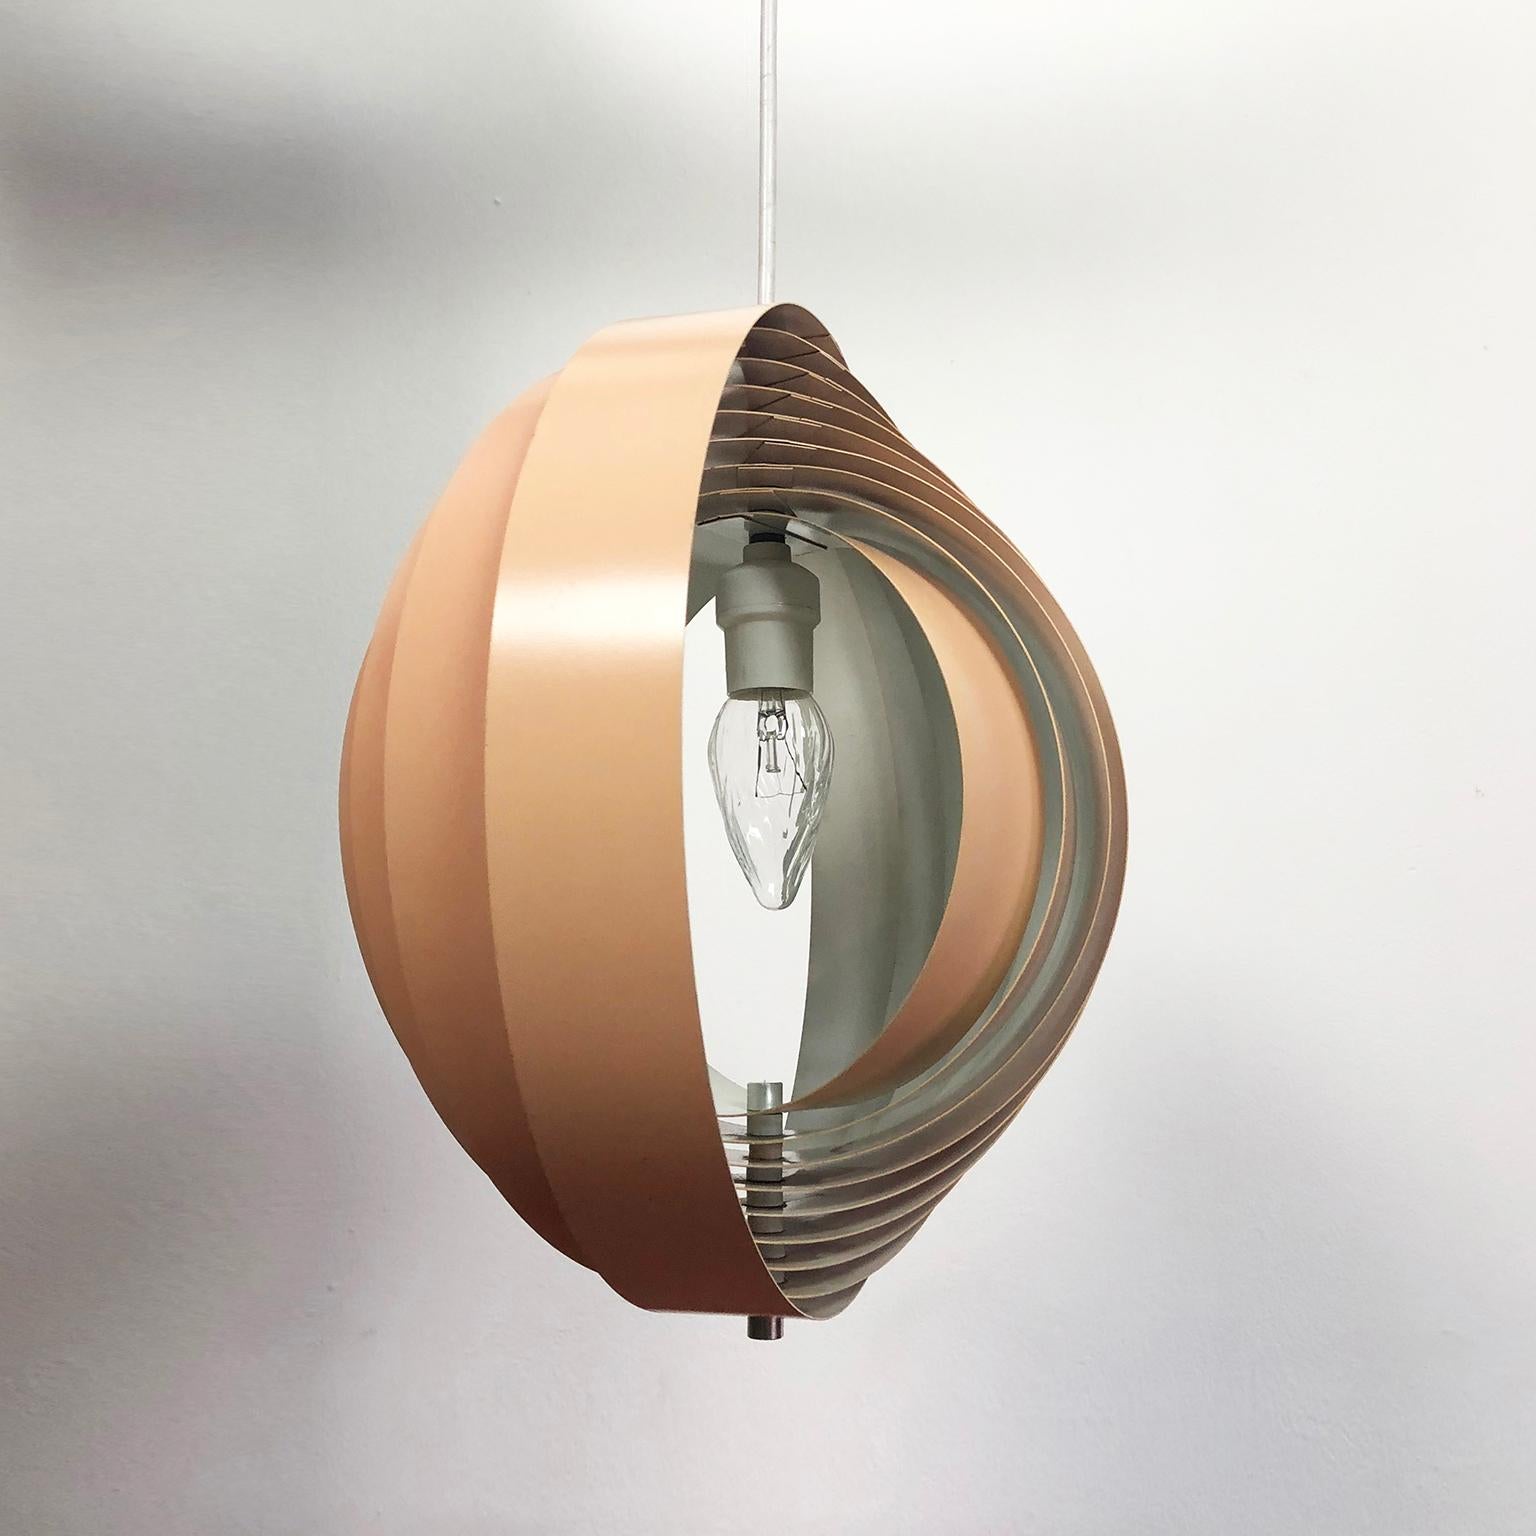 Lacquered metal version of the Panton moon lamp from the 1960s. Produced by Louis Poulsen. Fully adjustable. Beautiful example with original ceiling cap.